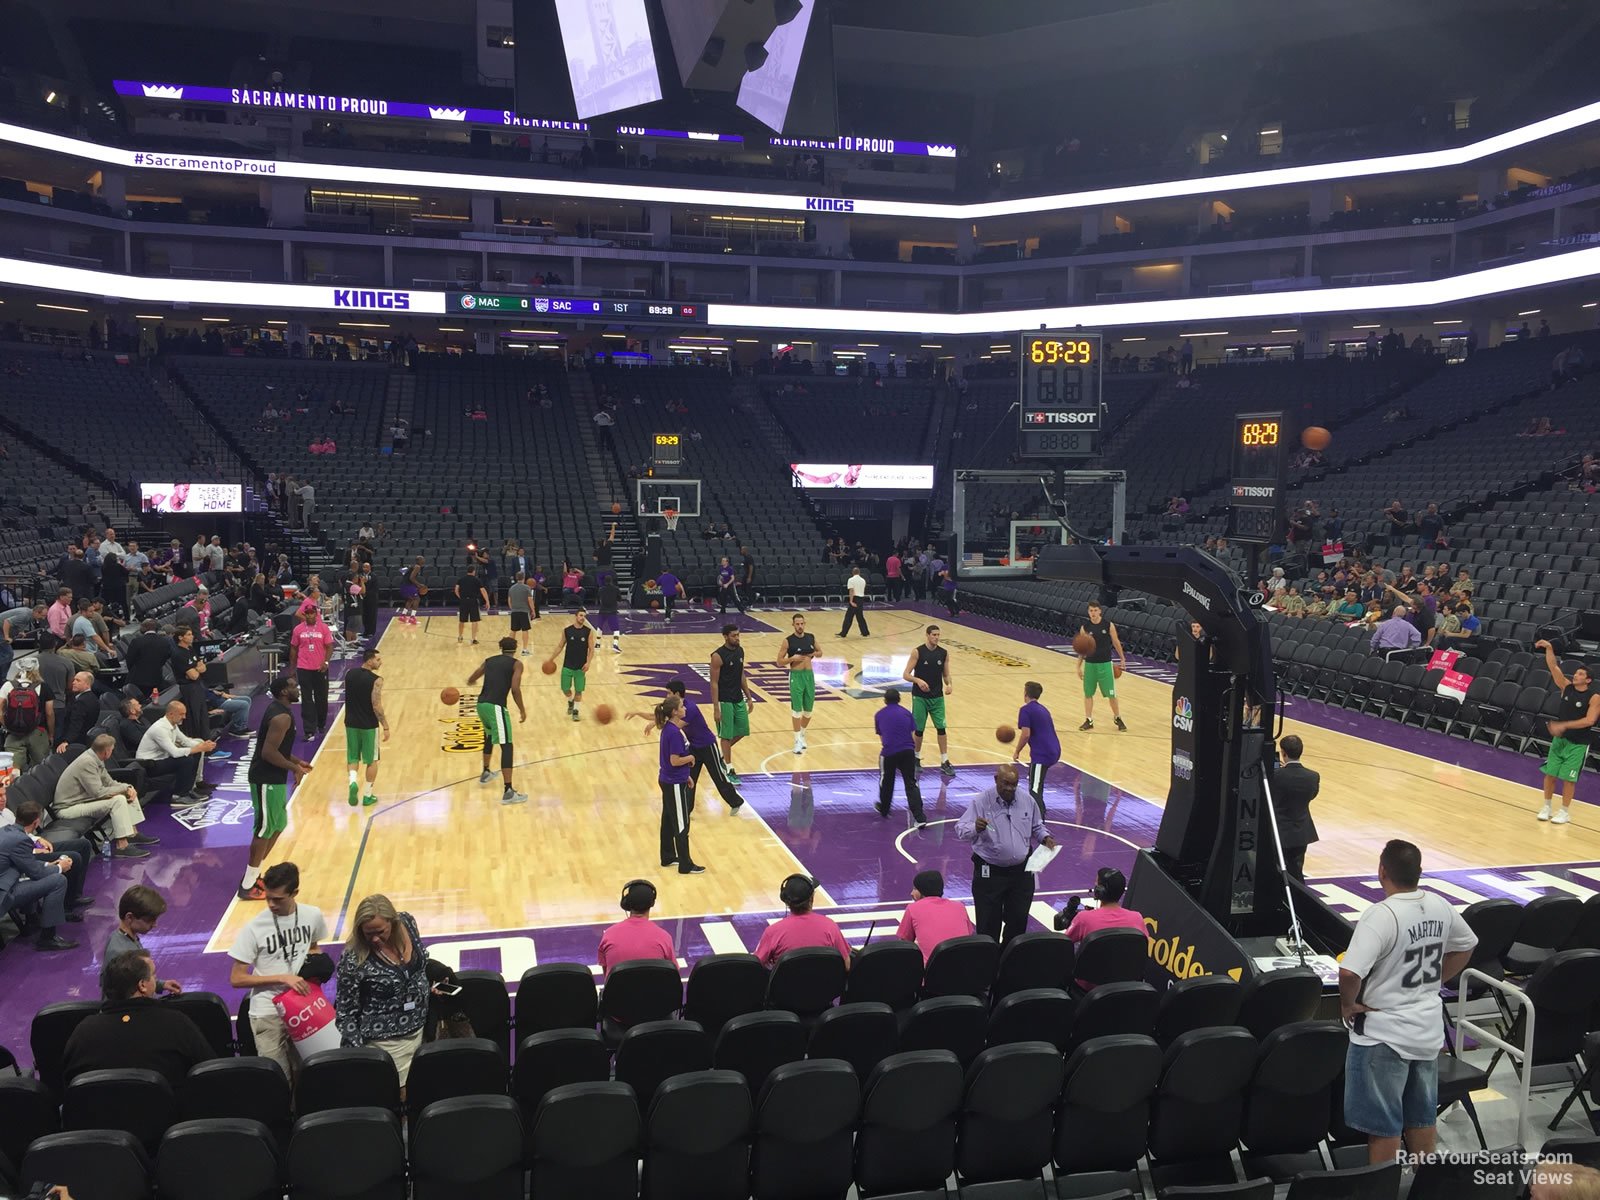 section 101, row dd seat view  for basketball - golden 1 center